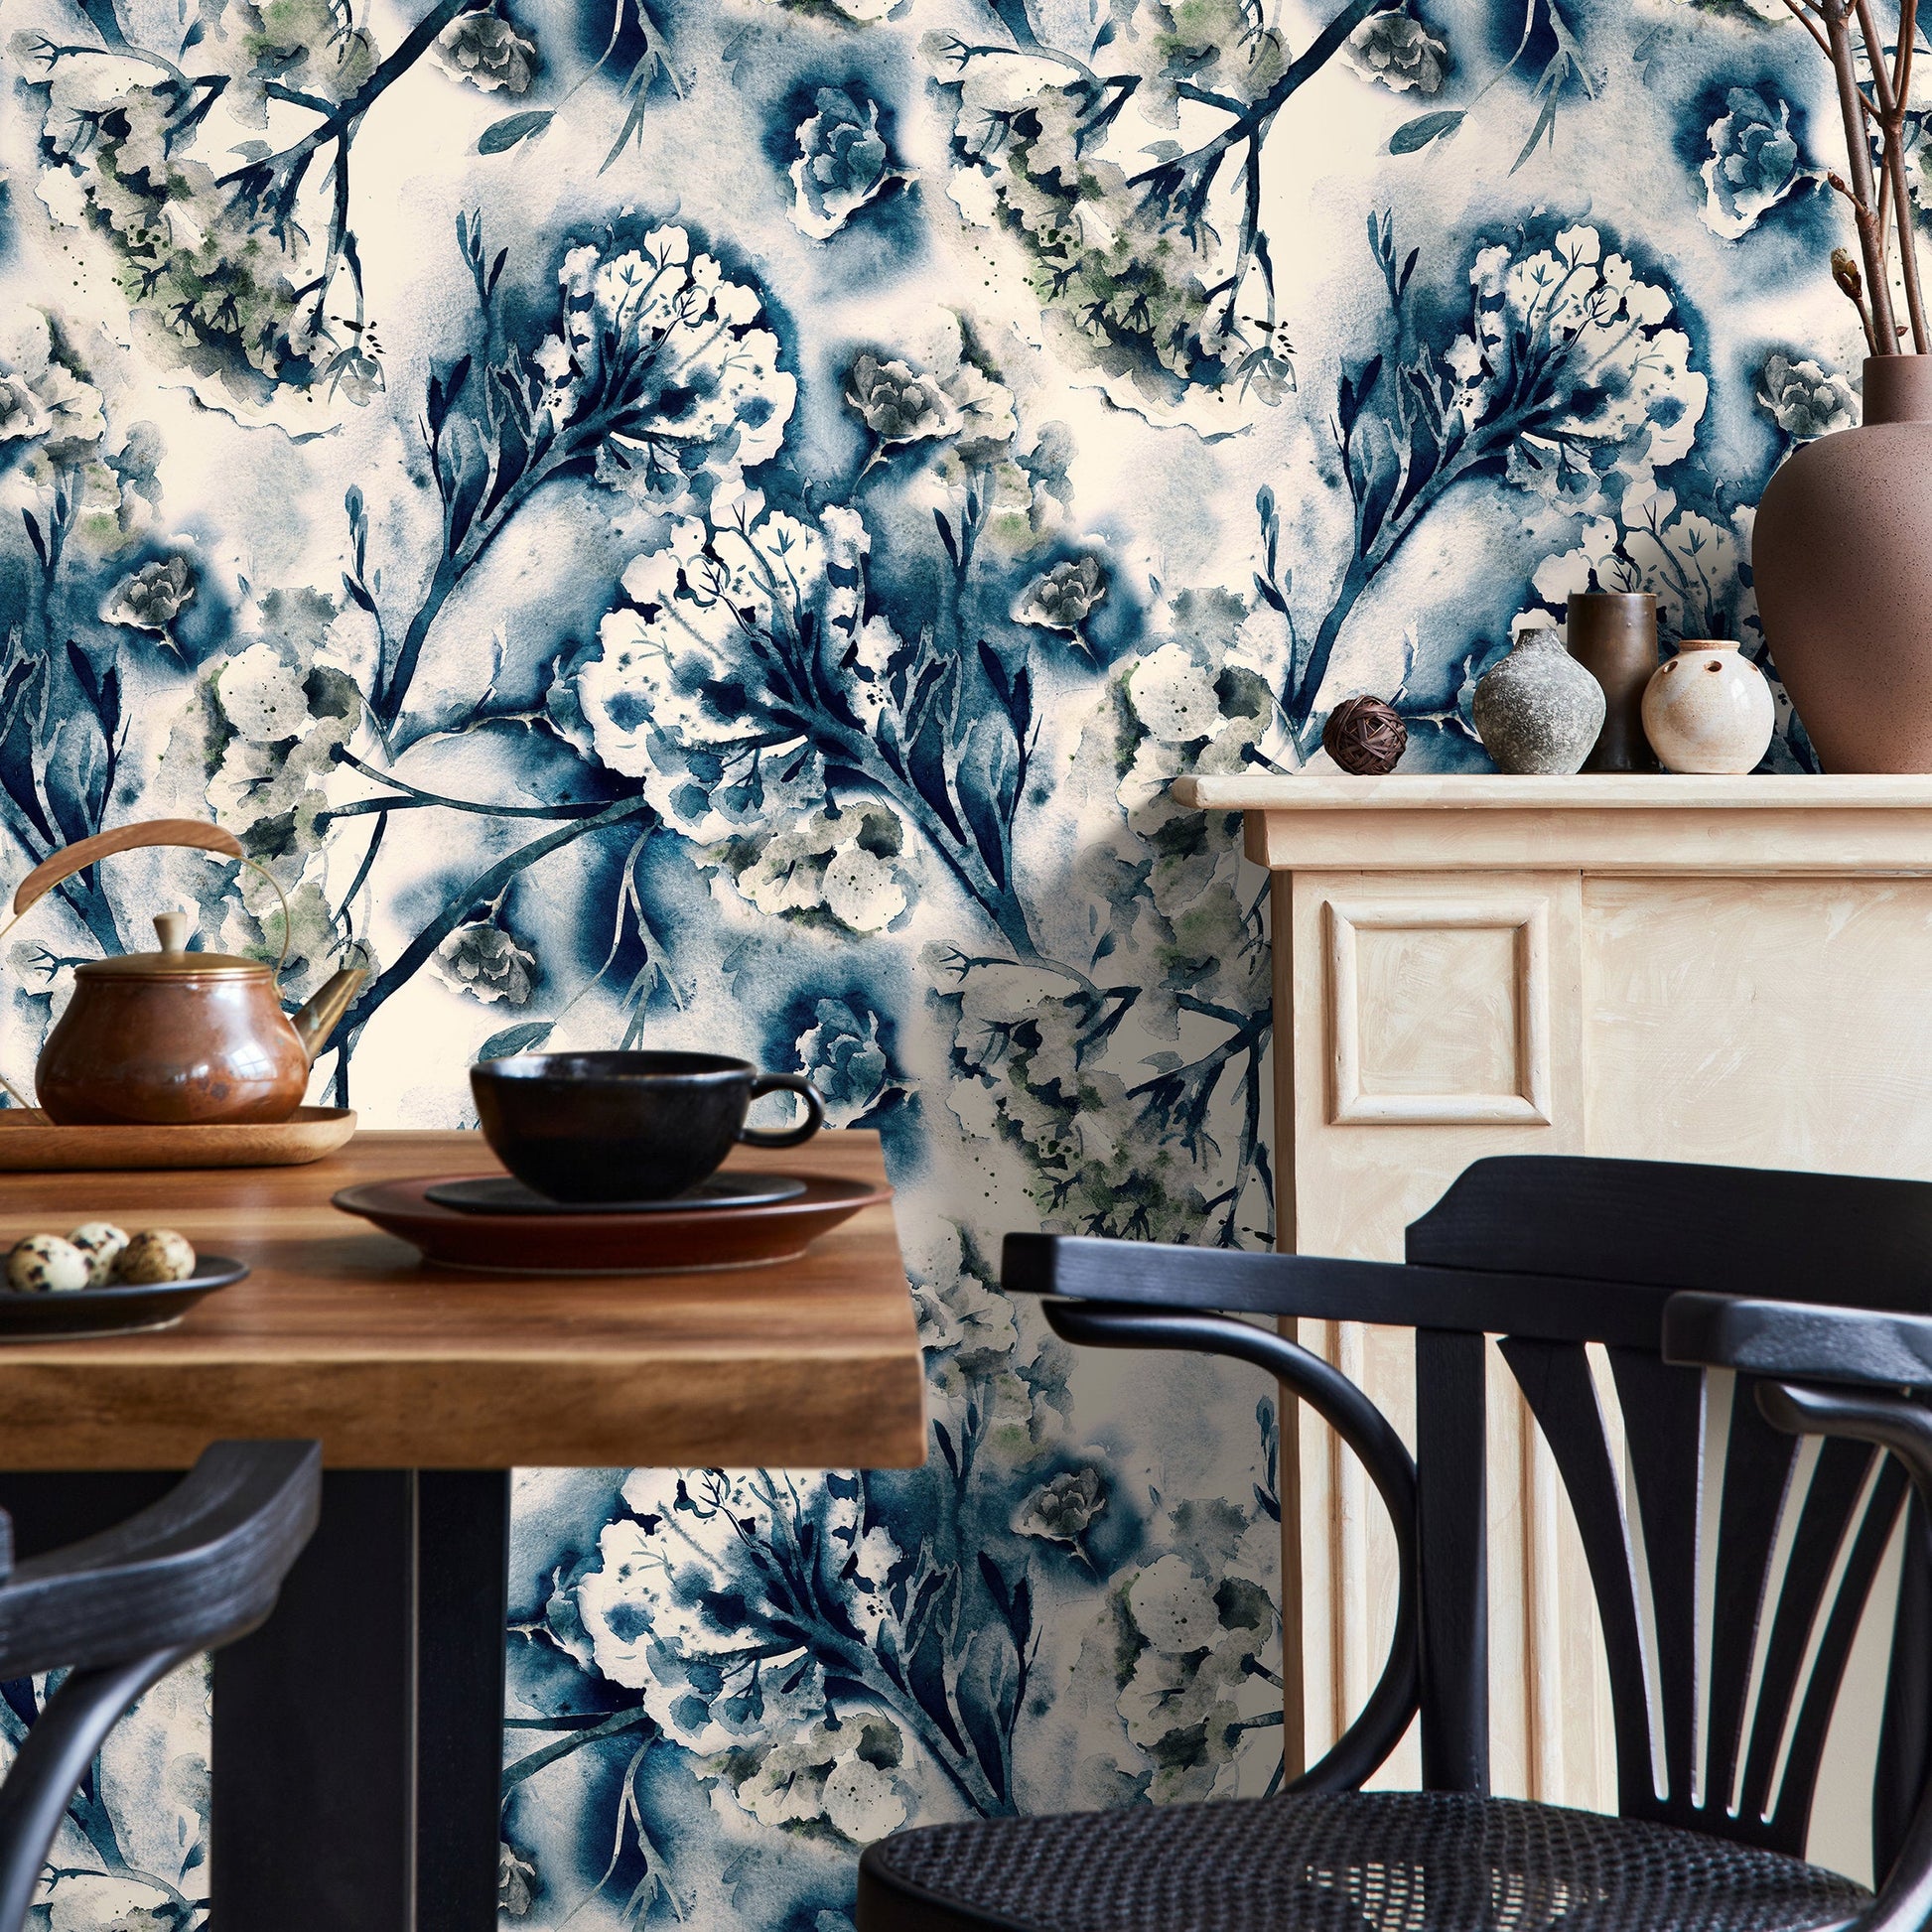 Dark Floral Fabric, Wallpaper and Home Decor